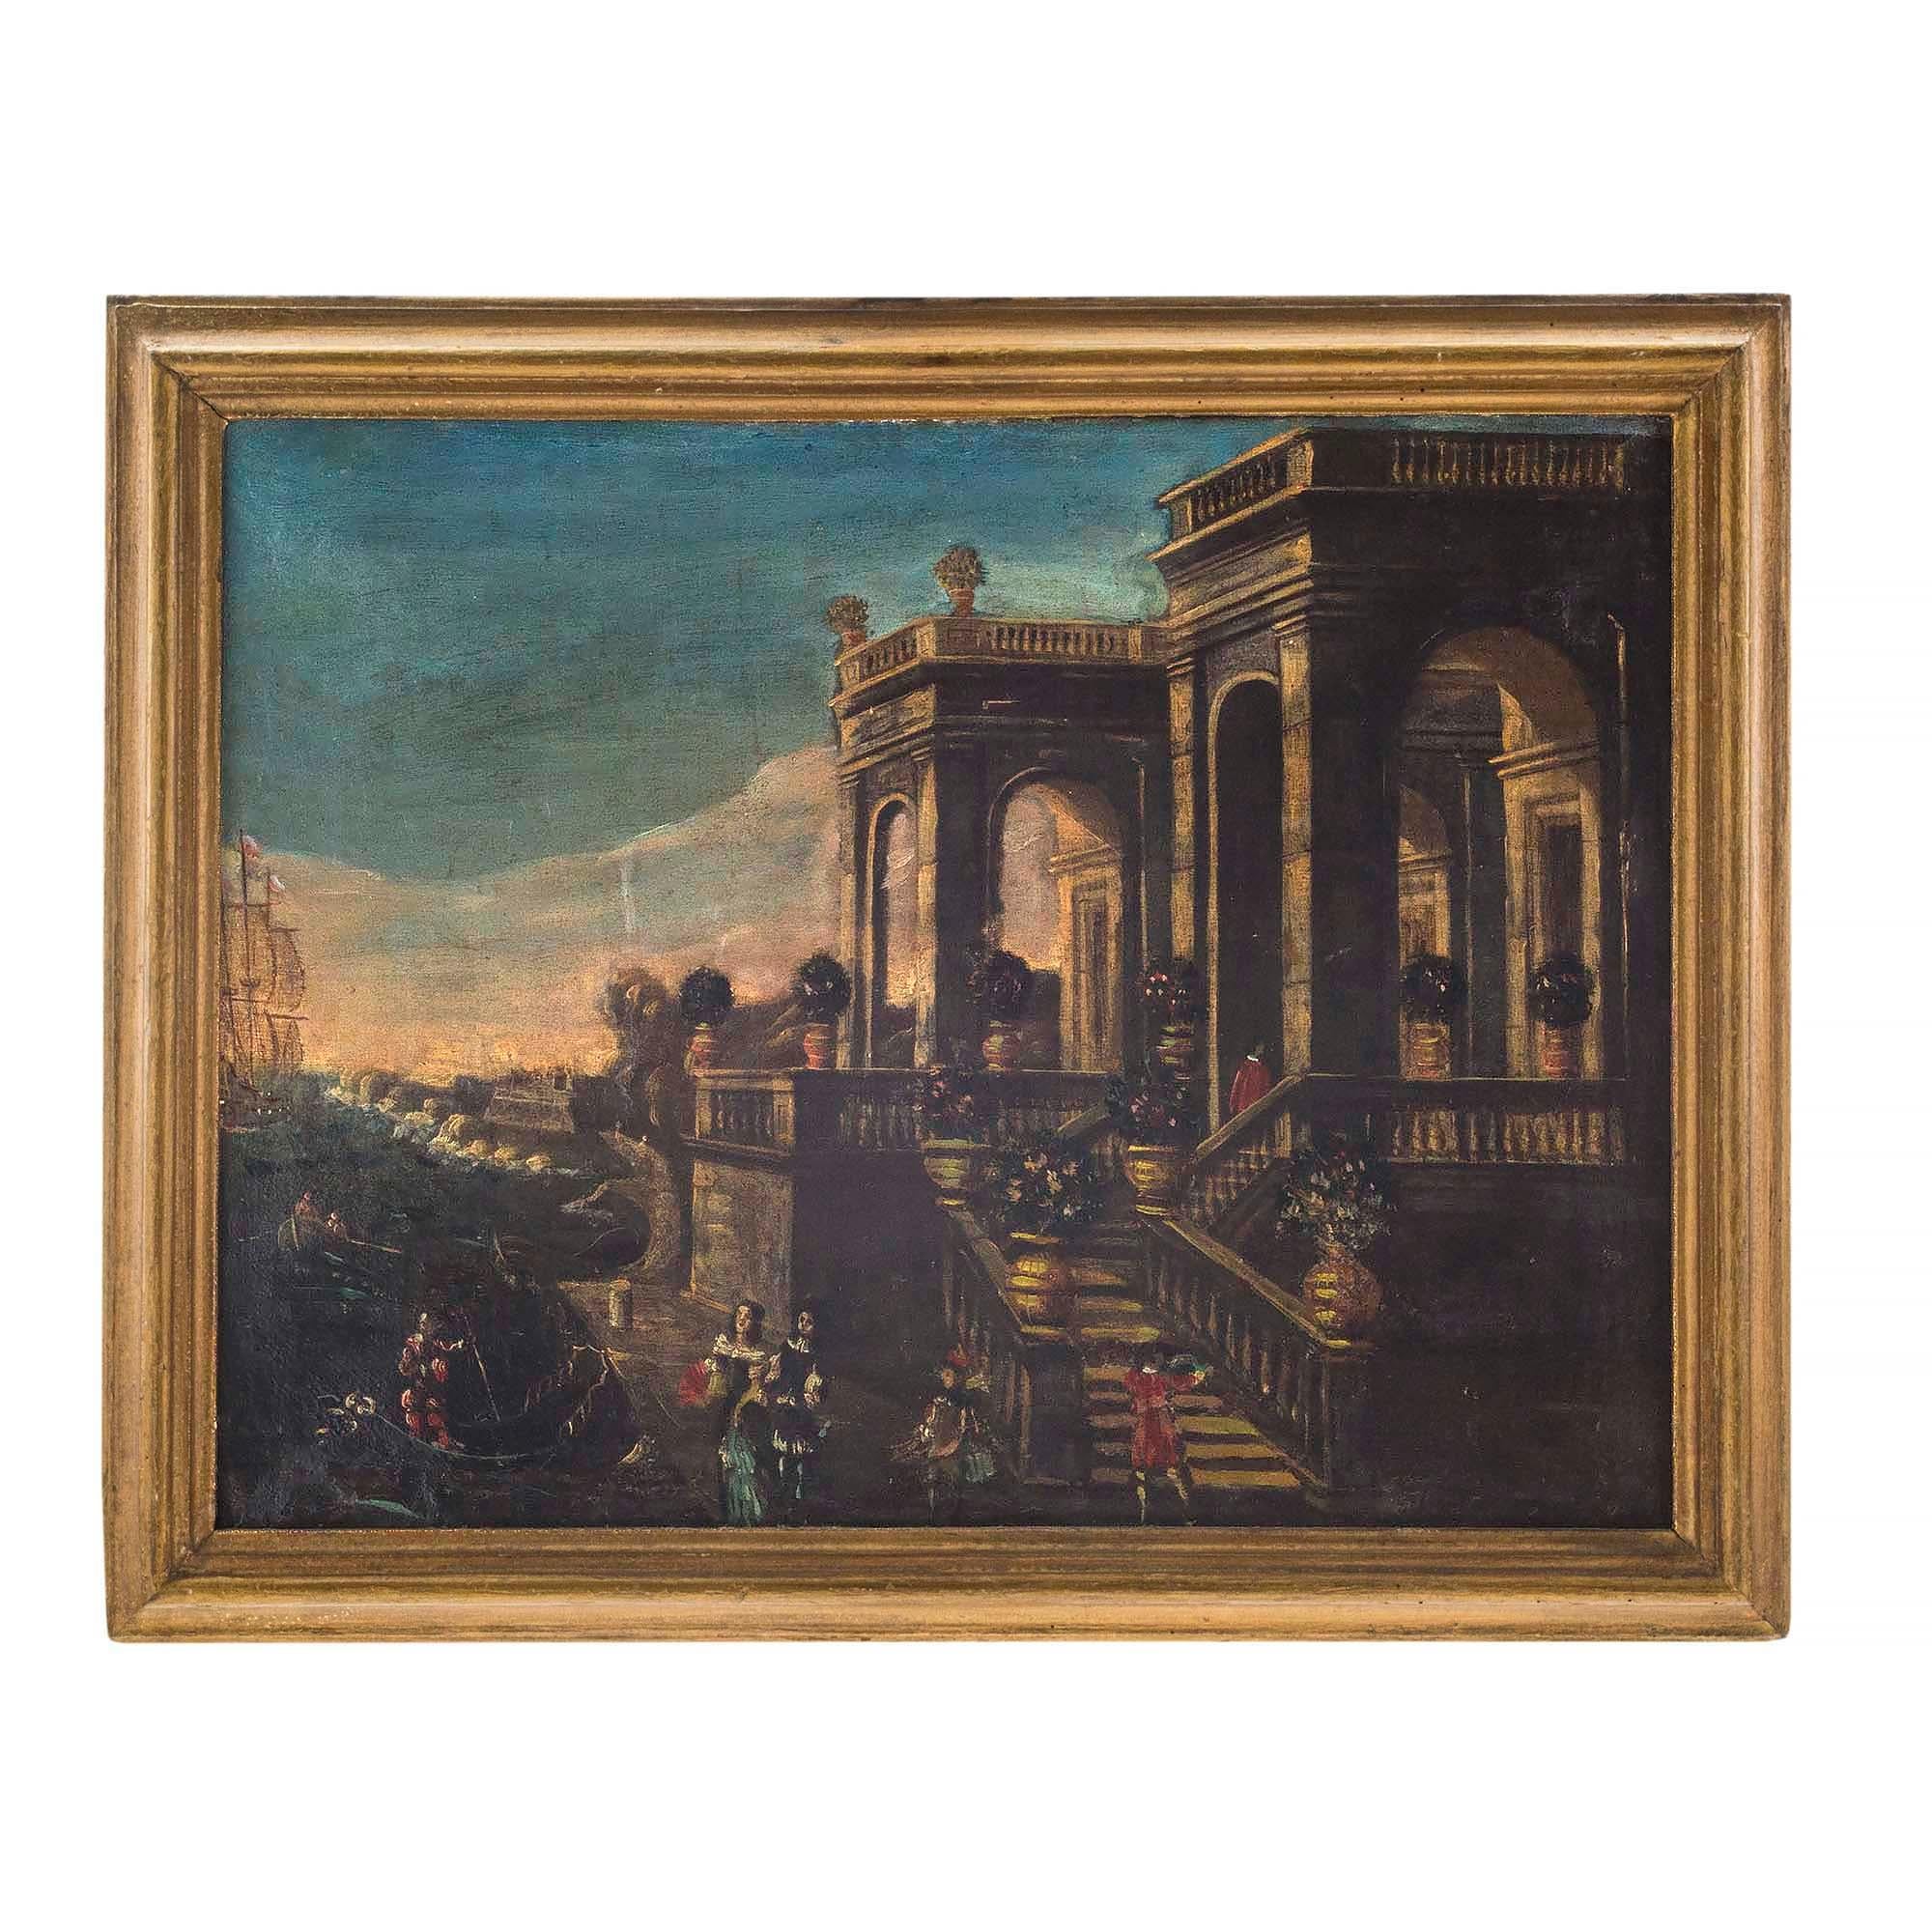 A superb pair of Italian 18th century Oil on Canvas paintings in their original giltwood frames. The painting on the left depicts large impressive battle ships in the back ground and beautiful Italian architecture in the foreground with figures